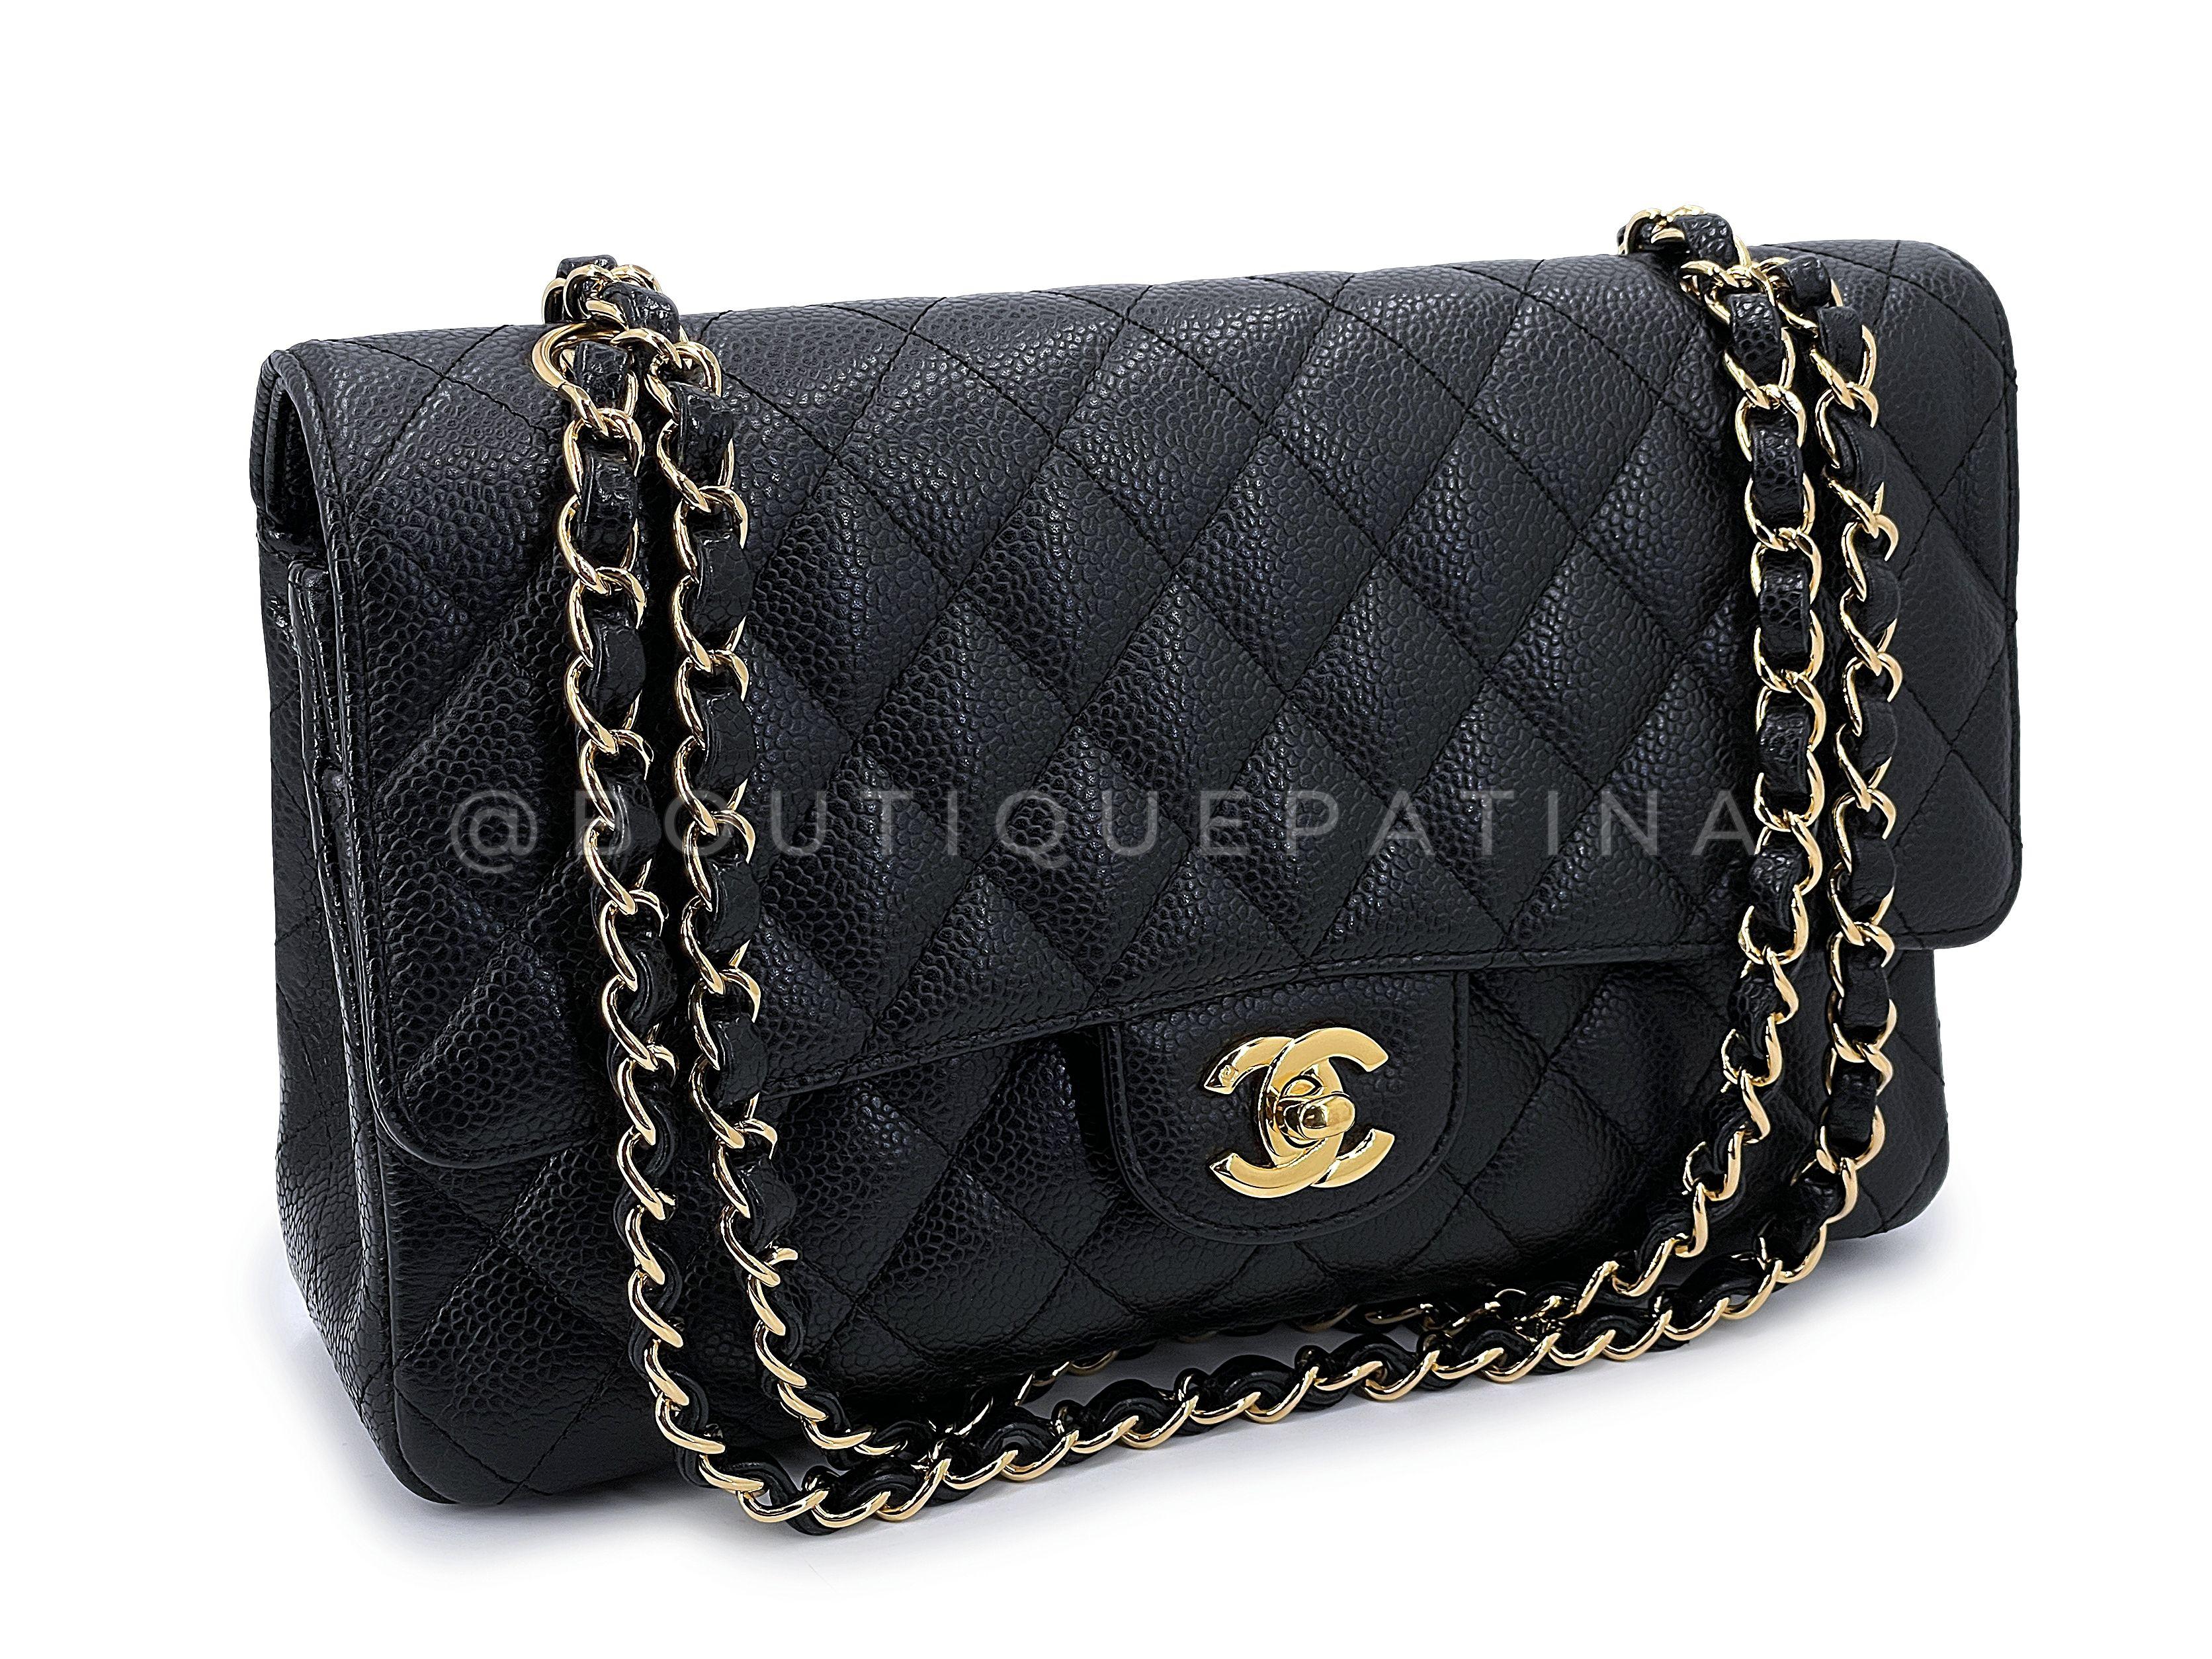 Store item: 67224
For 20 years, Boutique Patina has specialized in sourcing and curating the most pristine vintage and collectible accessories by searching closets around the world. 

This Chanel 2008 Vintage Black Caviar Medium Classic Double Flap